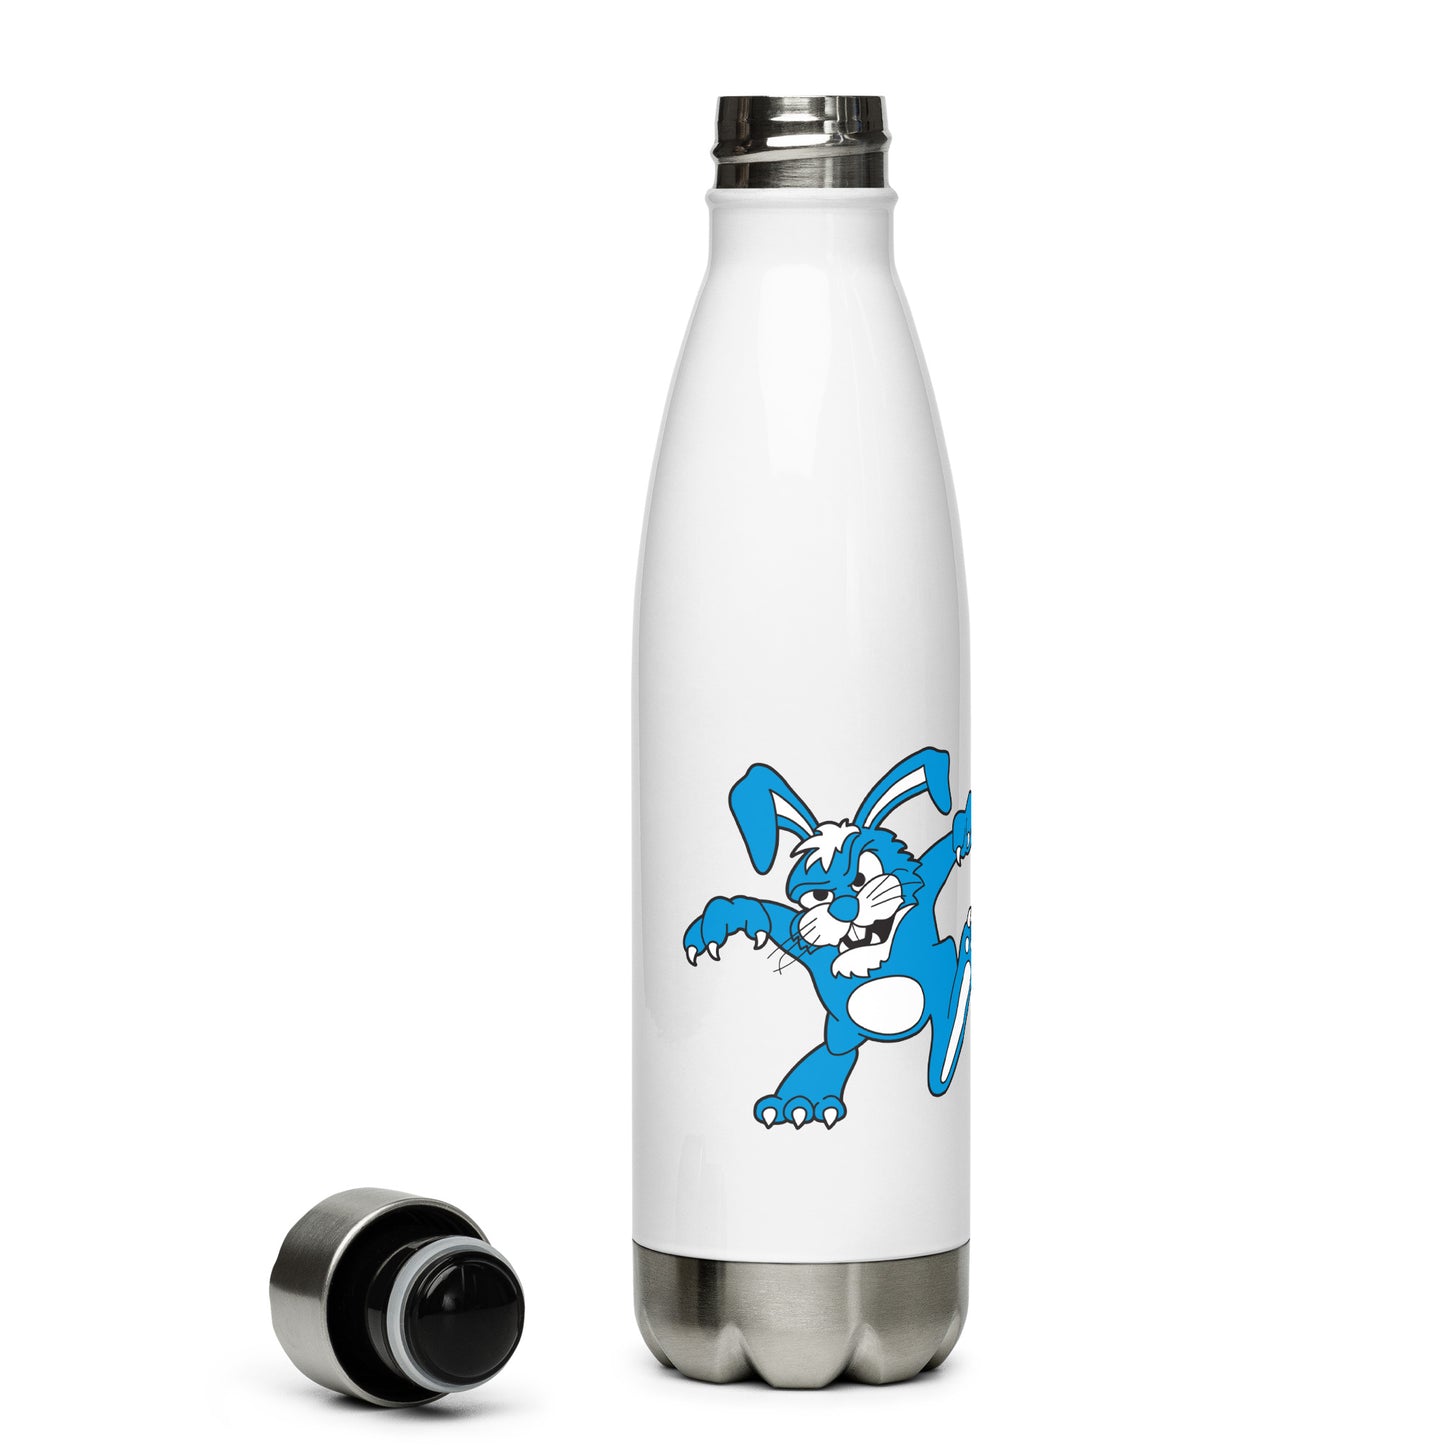 Killer Bunnies Logo Stainless Steel Water Bottle - with cap off